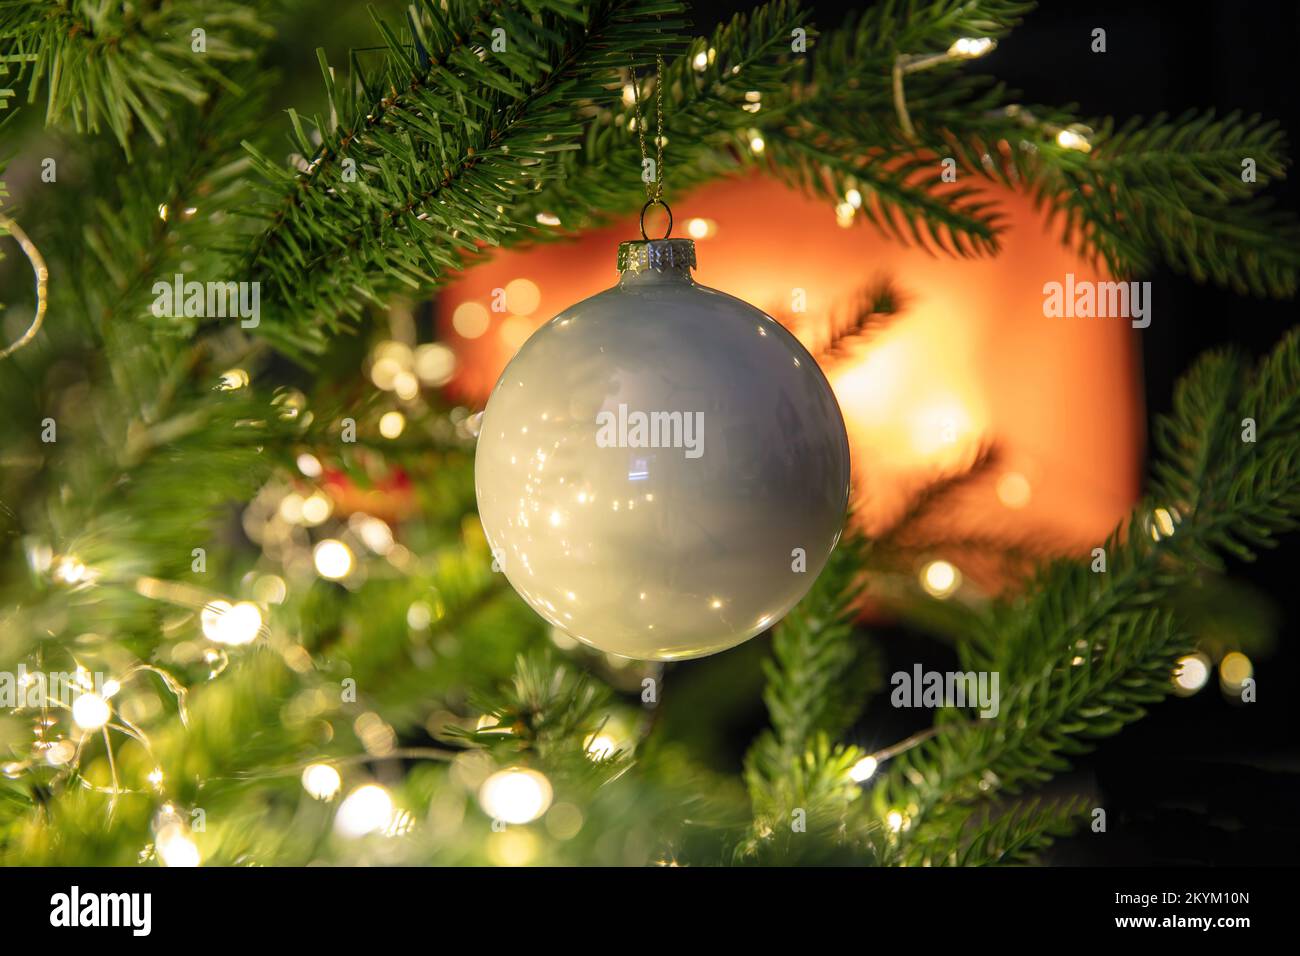 Christmas background. Xmas tree decoration bauble and lights close up view, burning fireplace, copy space. Stock Photo